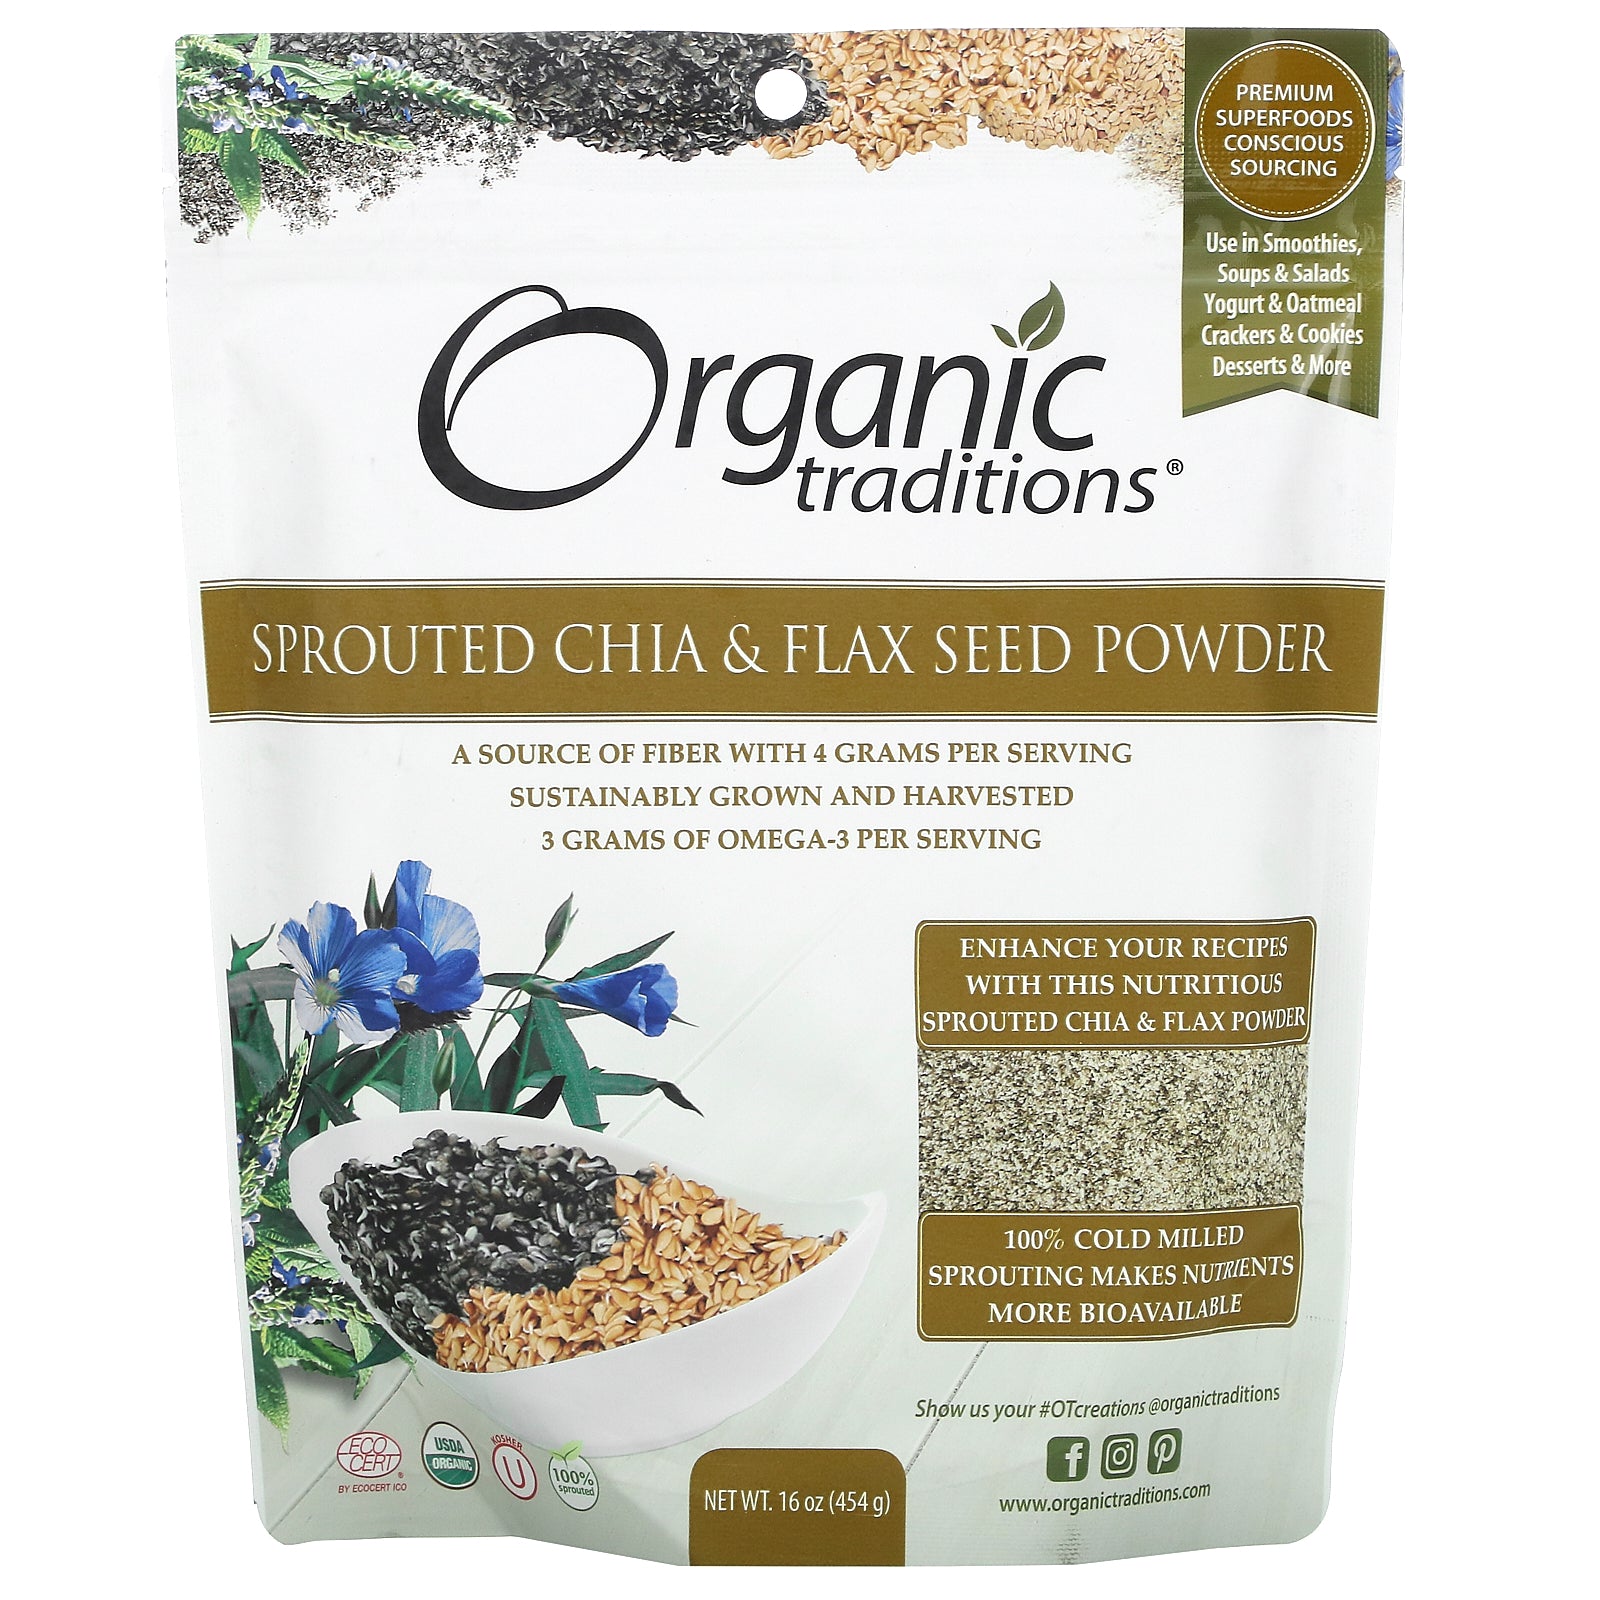 Organic Traditions Sprouted Chia & Flax Seed Powder, (454 g)